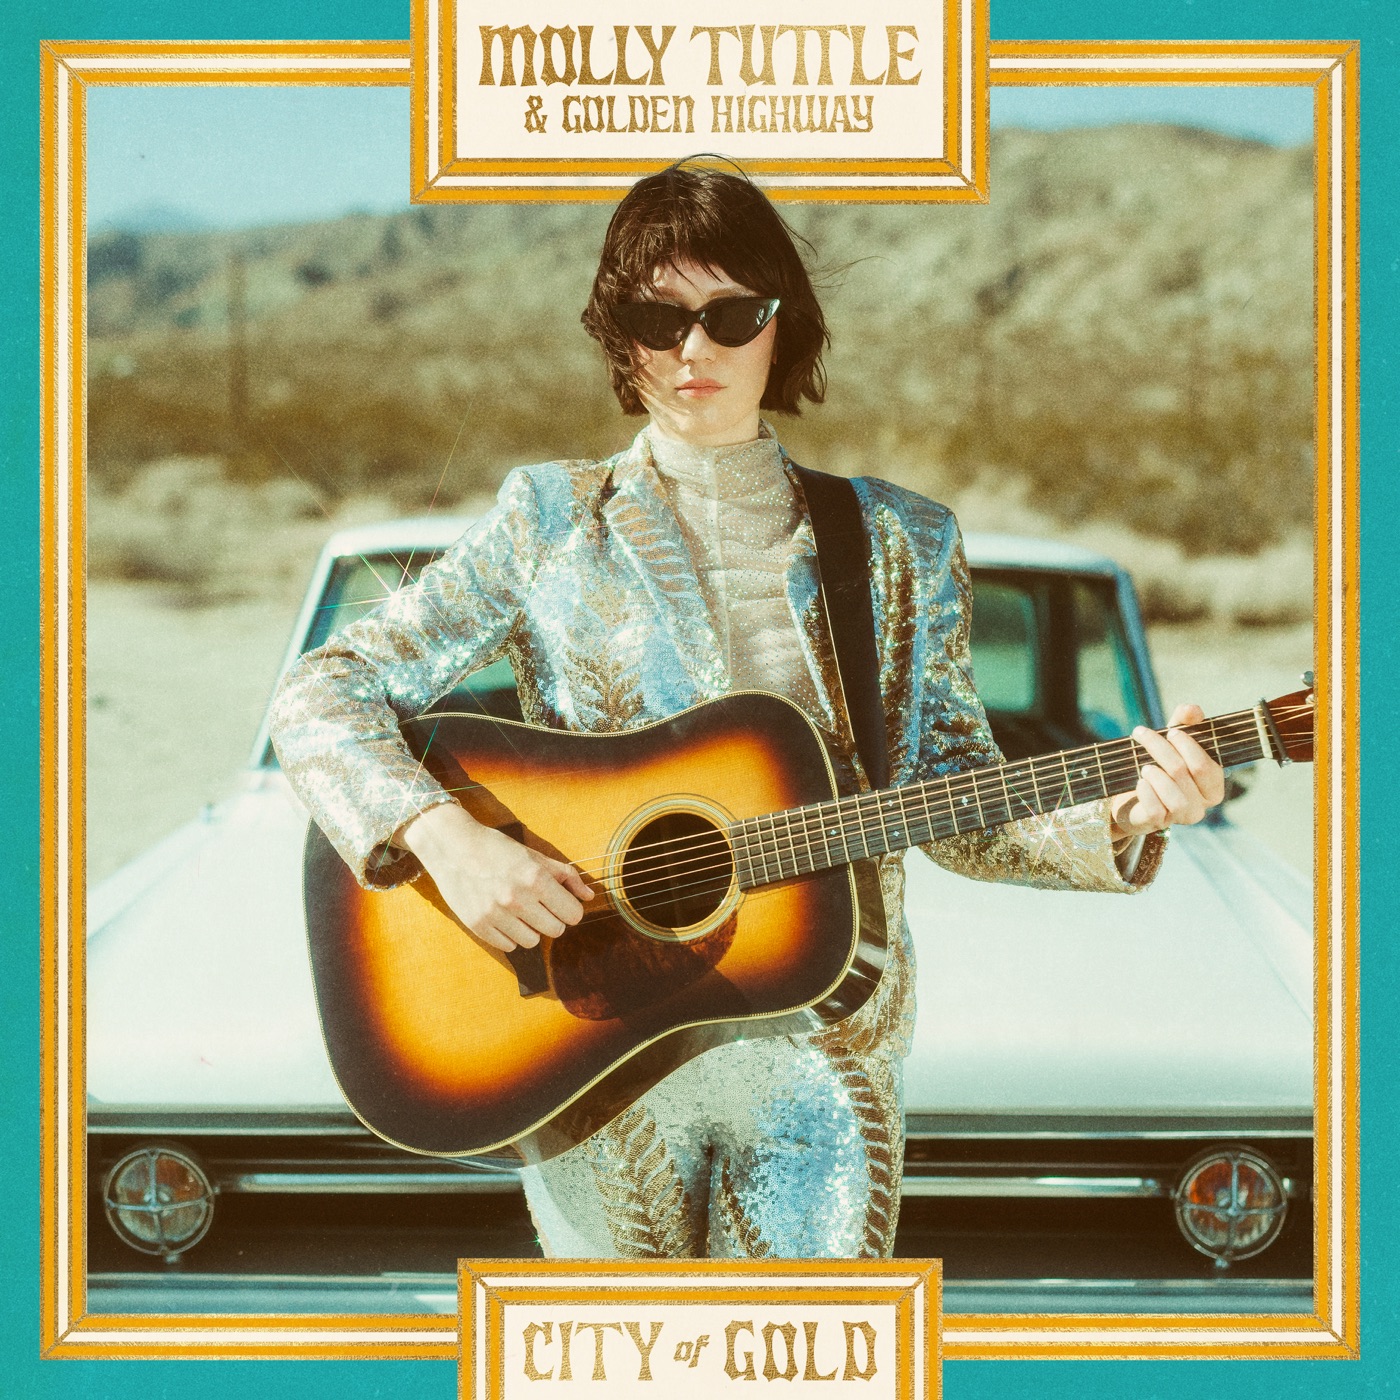 City of Gold by Molly Tuttle, Golden Highway